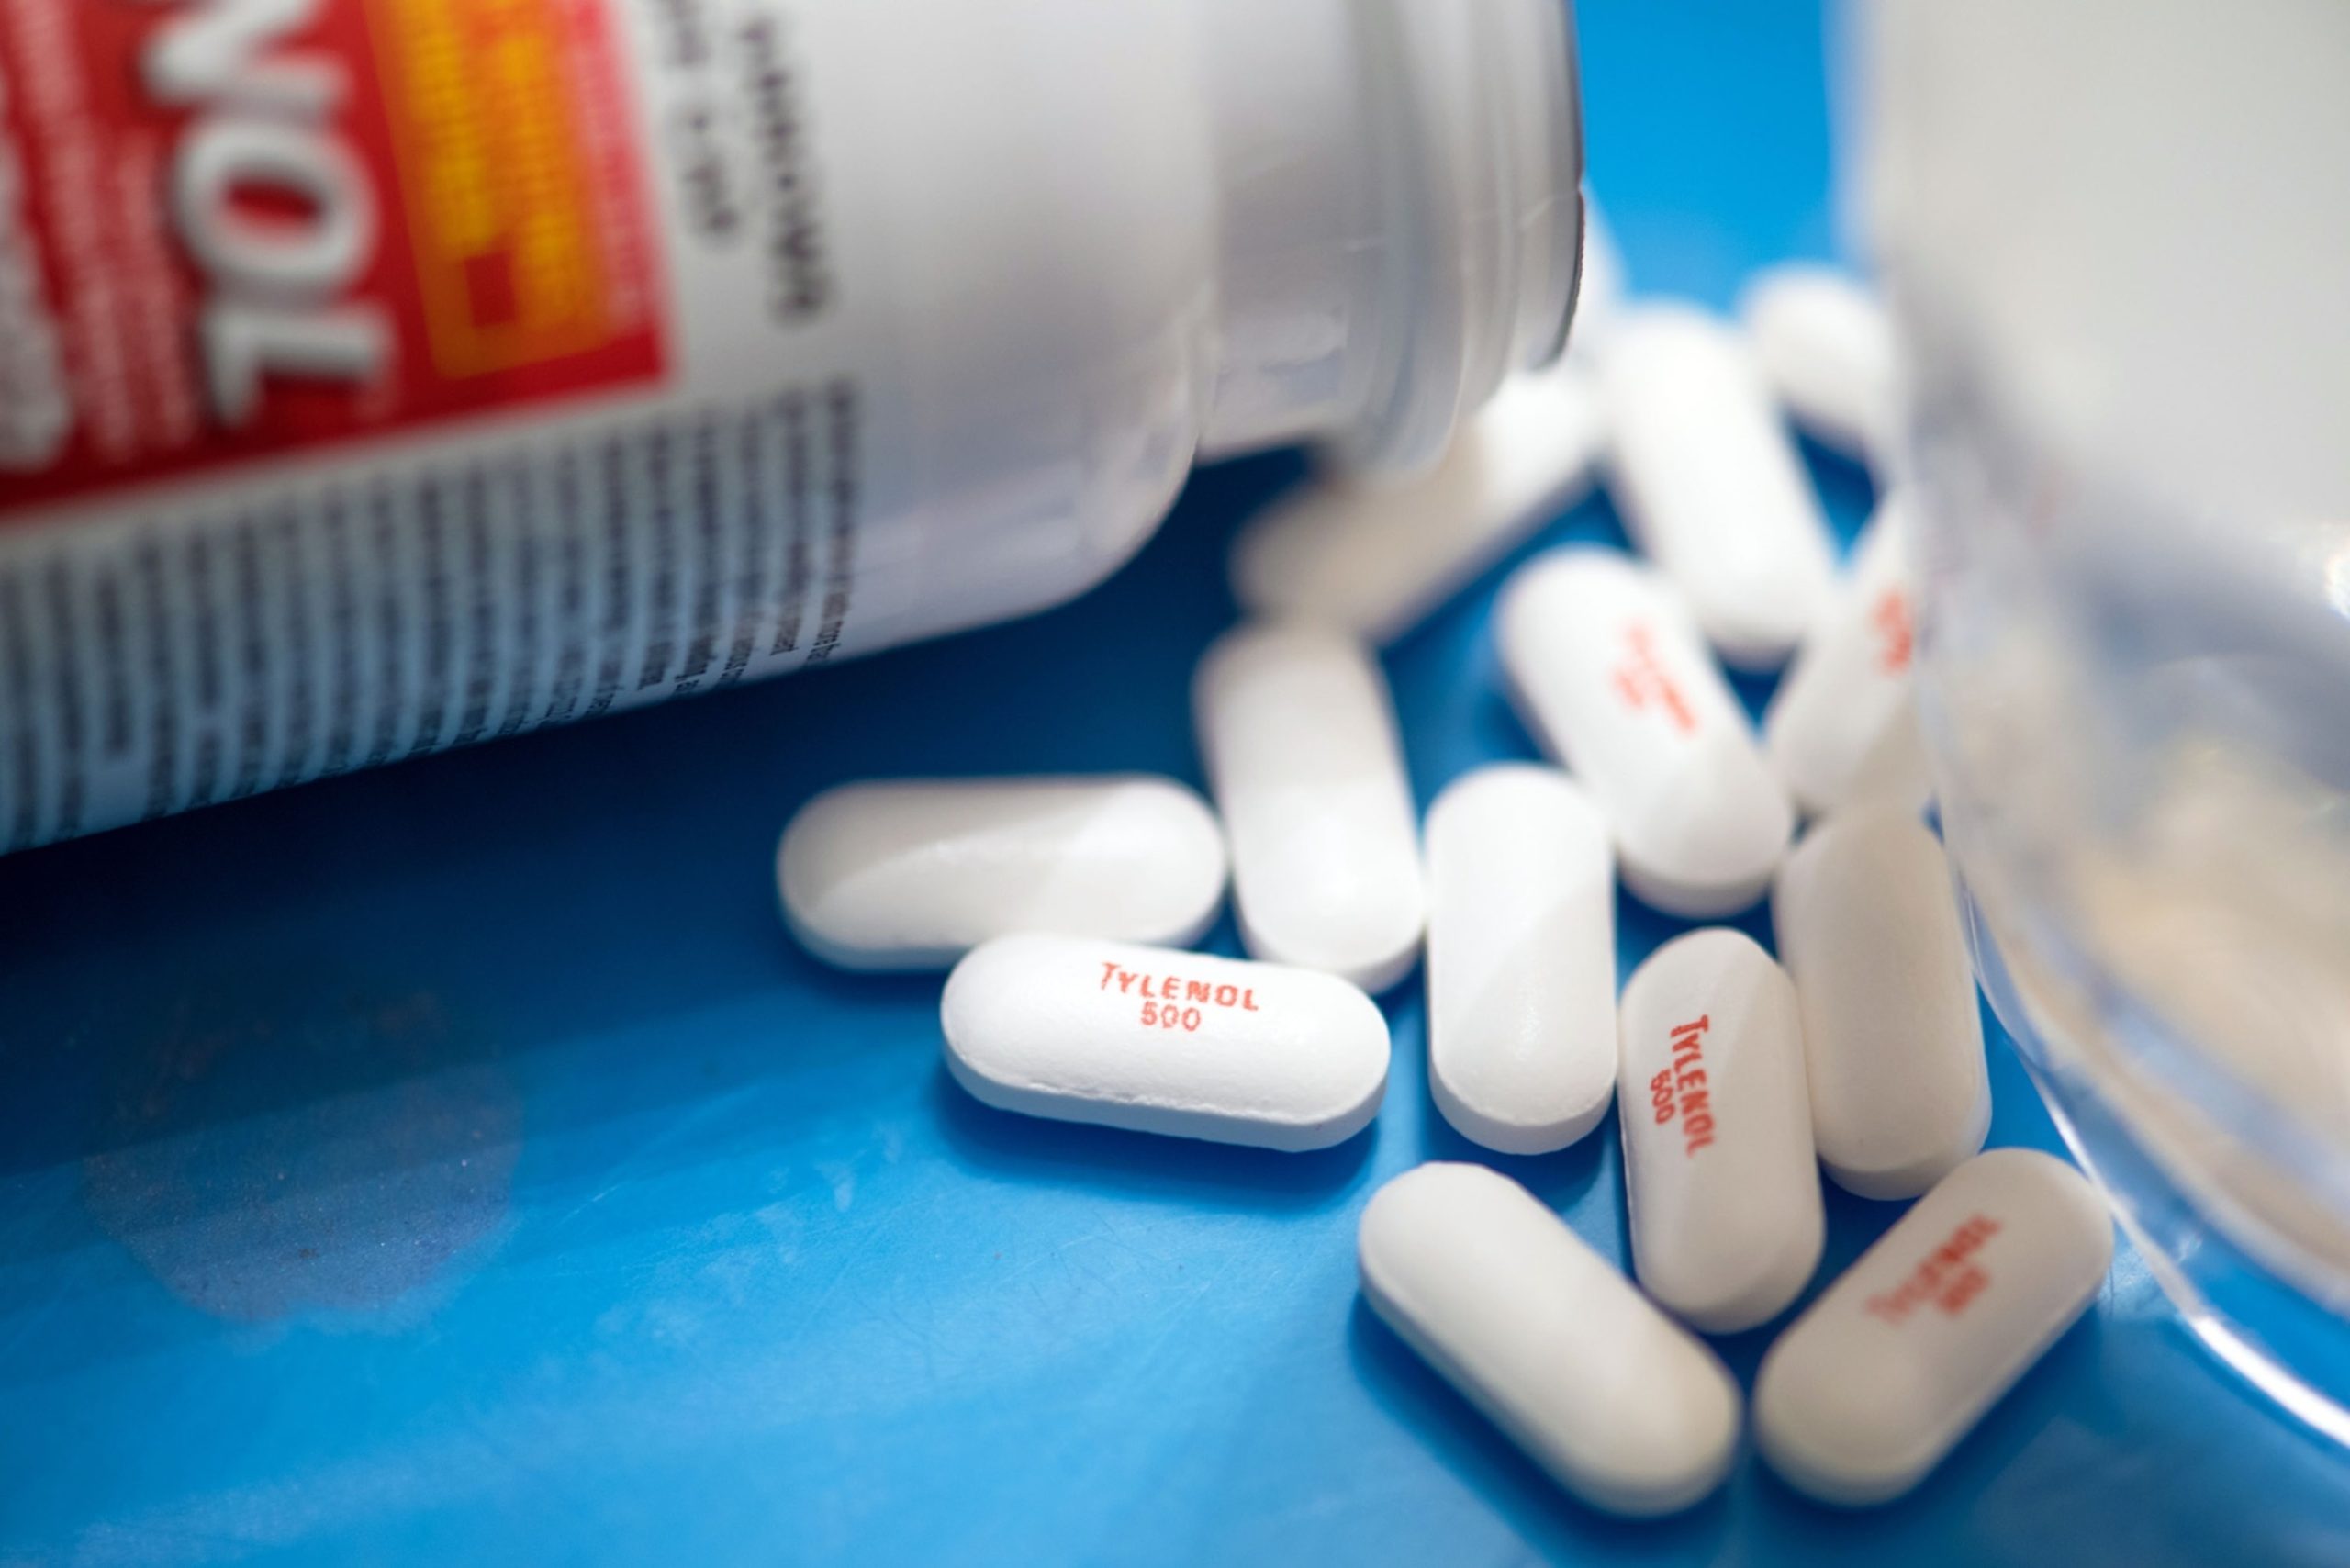 Federal Judge Rules That Research Does Not Support Linking Acetaminophen to Autism and ADHD